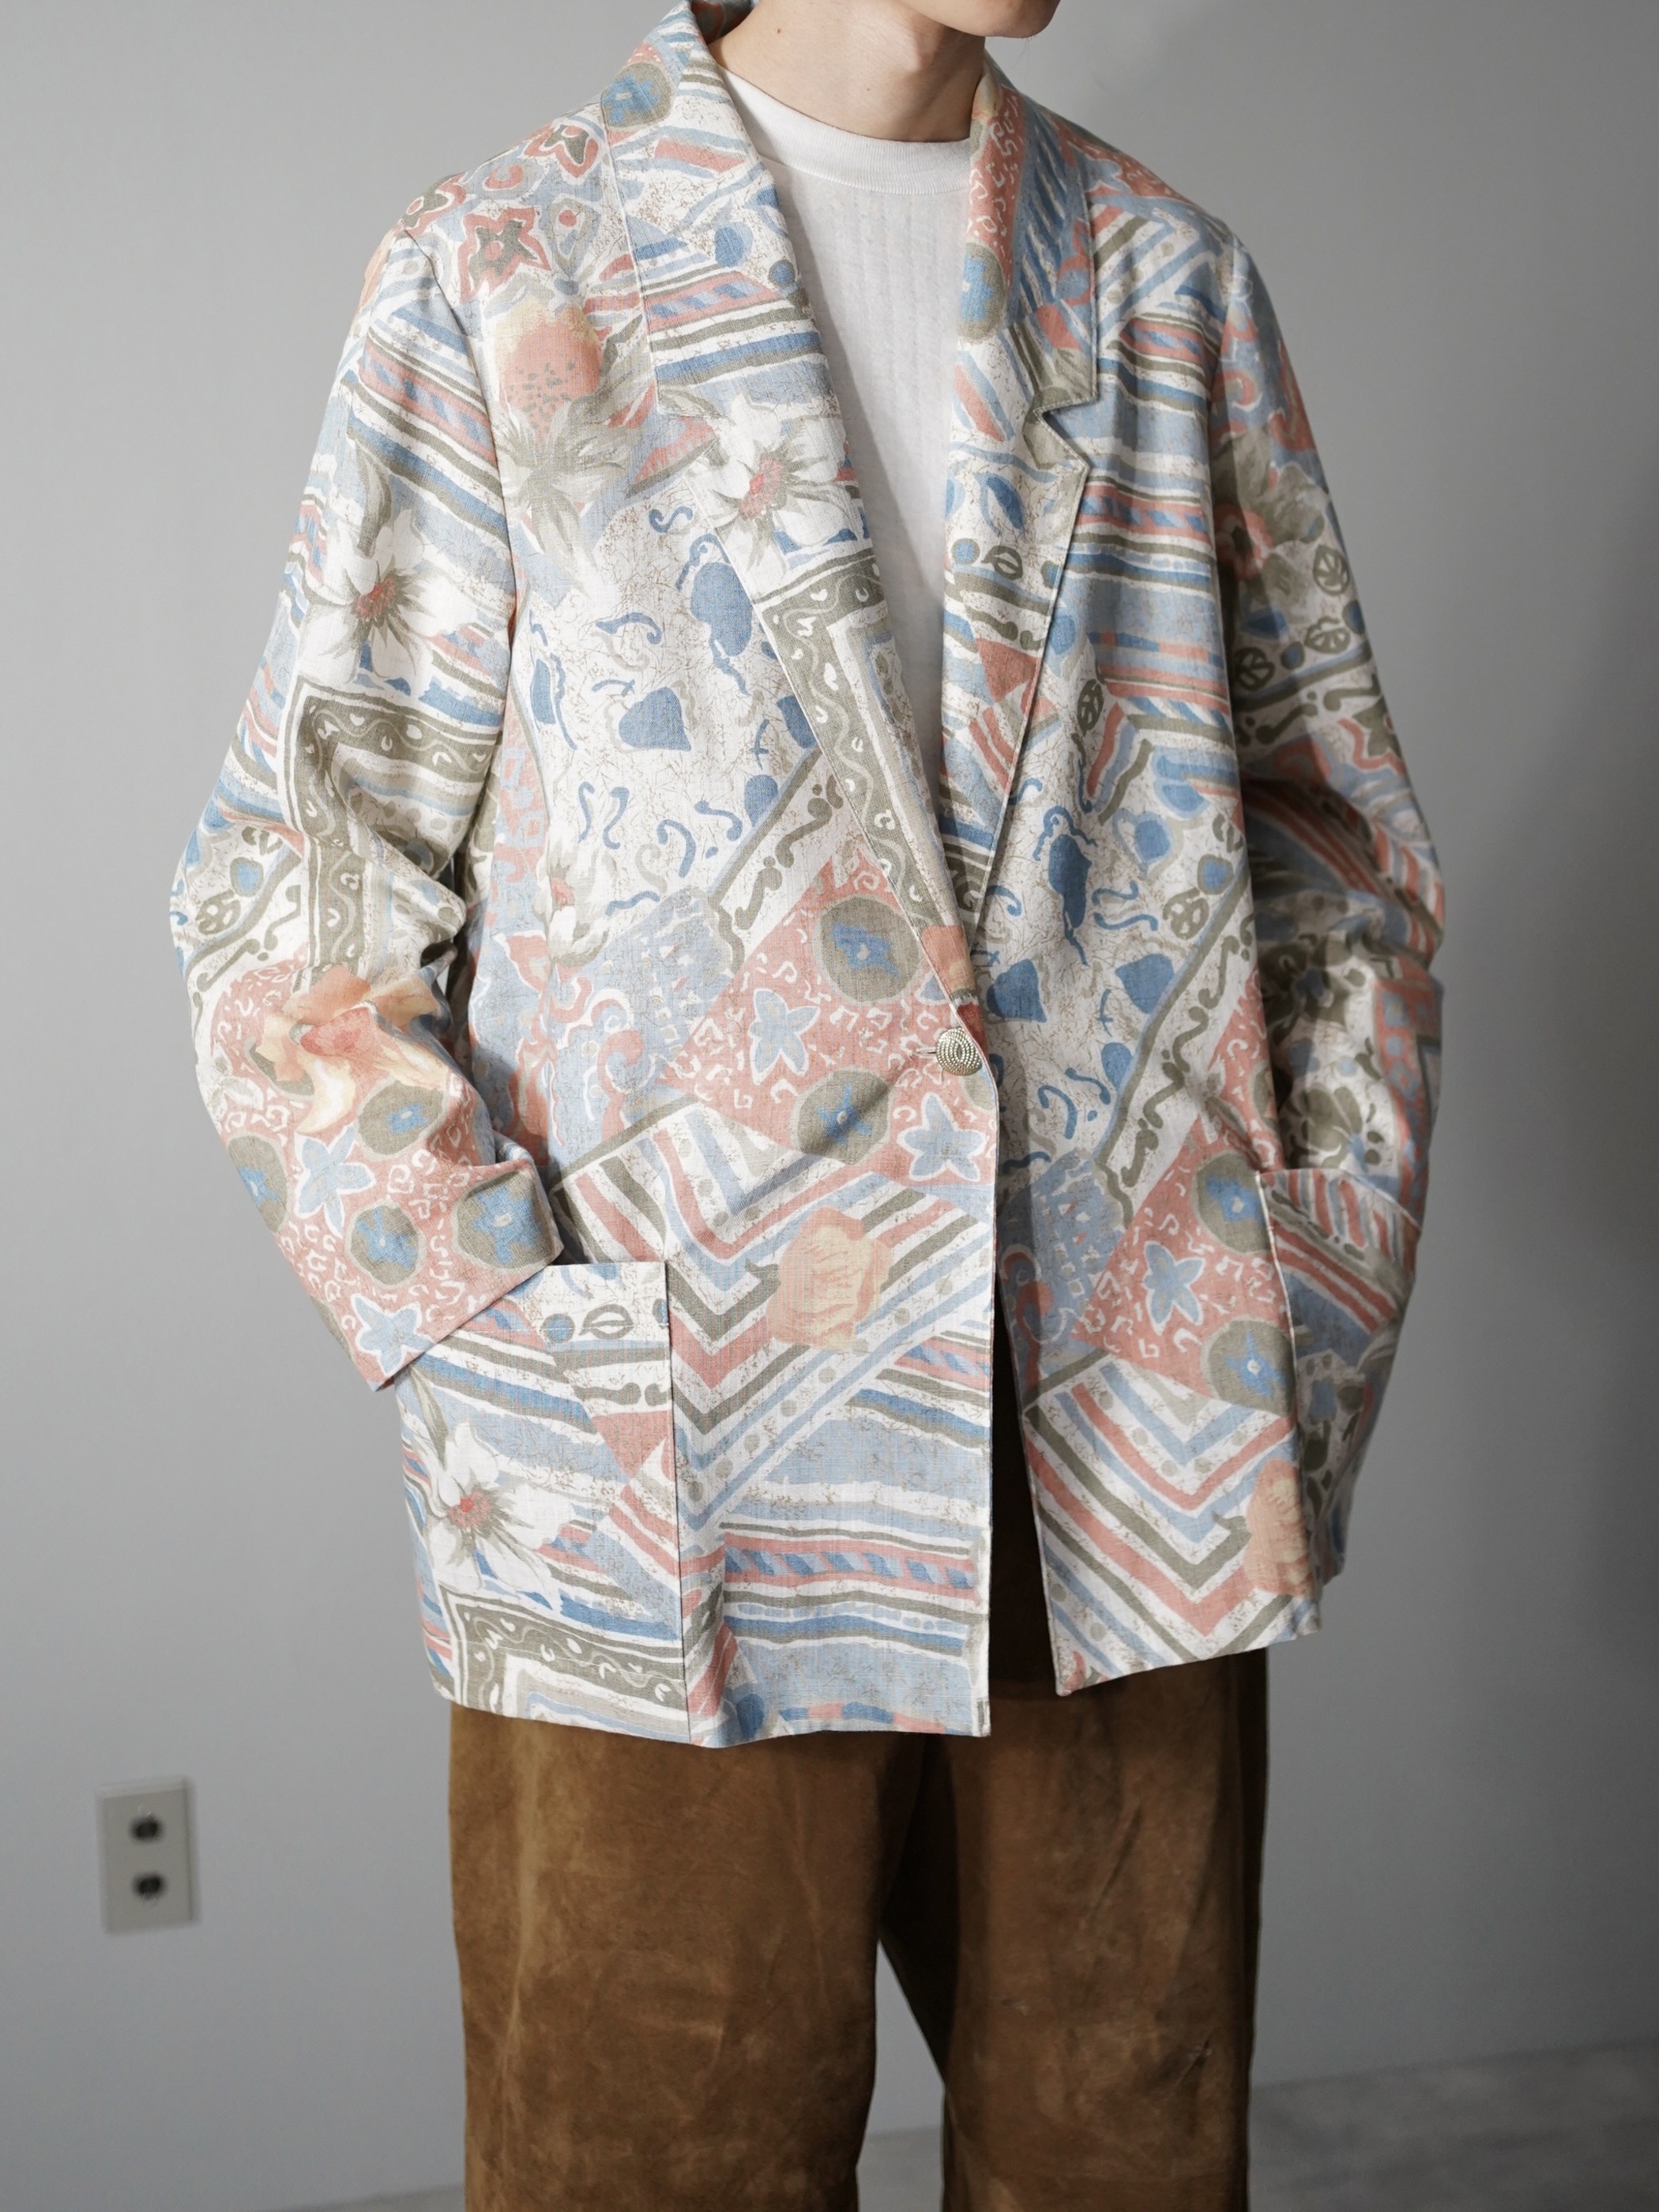 SAG HARBOR "Poly Rayon Linen" casual tailored jacket